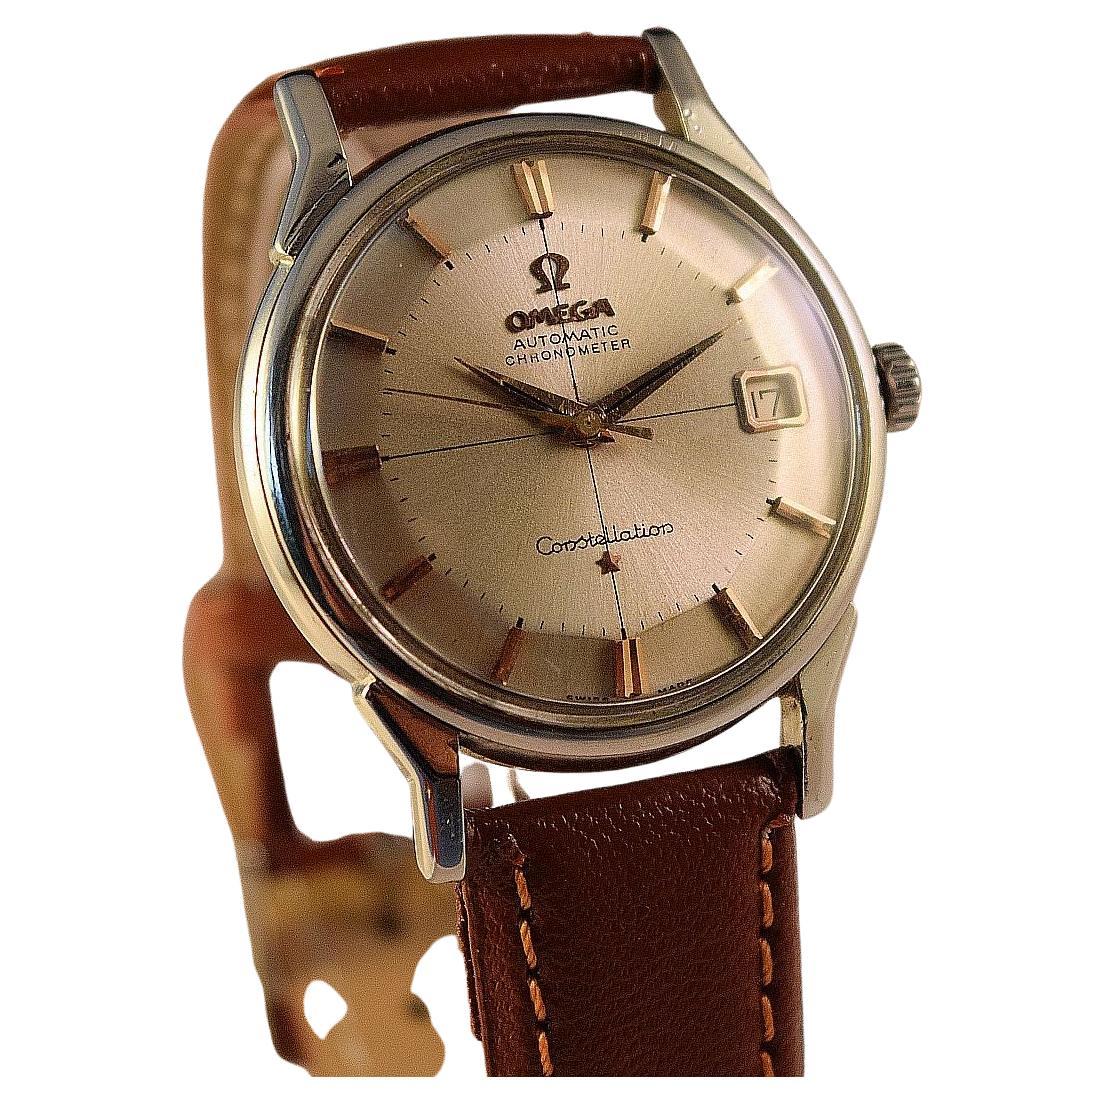 Omega Constellation Pie Pan Automatic
This vintage Omega Constellation ‘Pie-Pan’ stainless steel wristwatch on a leather strap dates from circa 1960's and is in overall excellent condition as it is recently serviced.
Original  silver dial with gold 